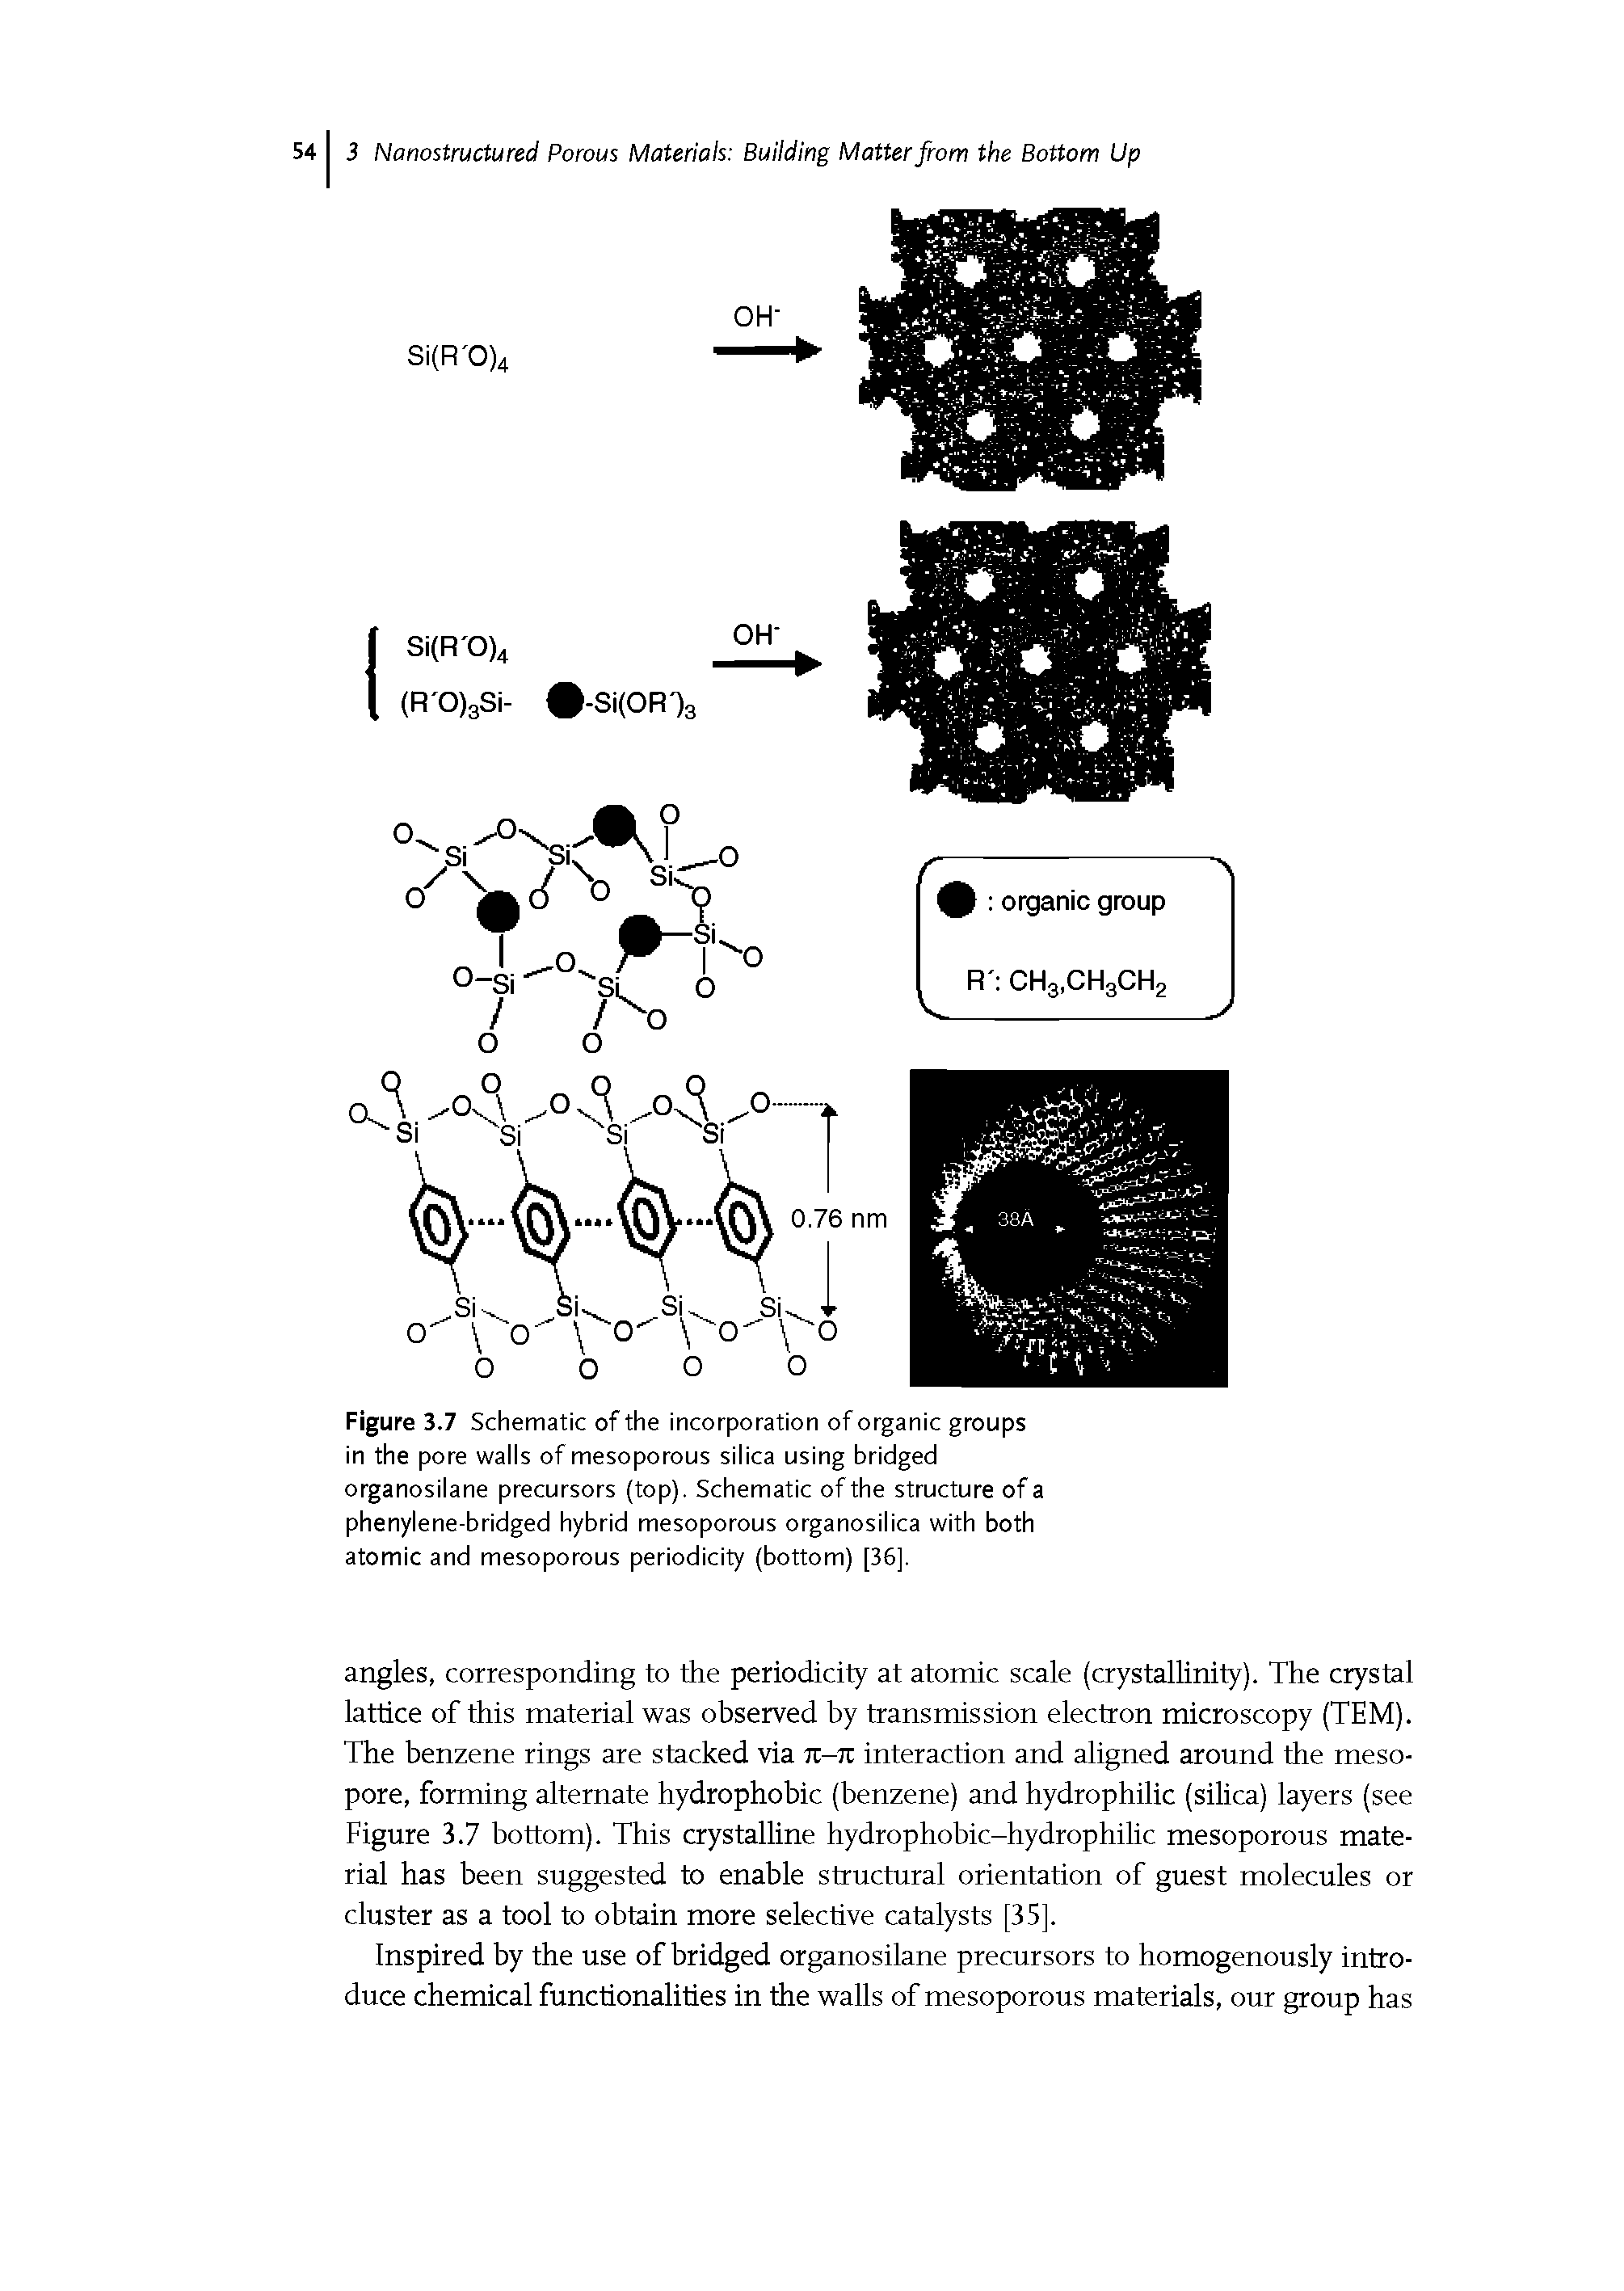 Figure 3.7 Schematic of the incorporation of organic groups in the pore walls of mesoporous silica using bridged organosilane precursors (top). Schematic of the structure of a phenylene-bridged hybrid mesoporous organosilica with both atomic and mesoporous periodicity (bottom) [36],...